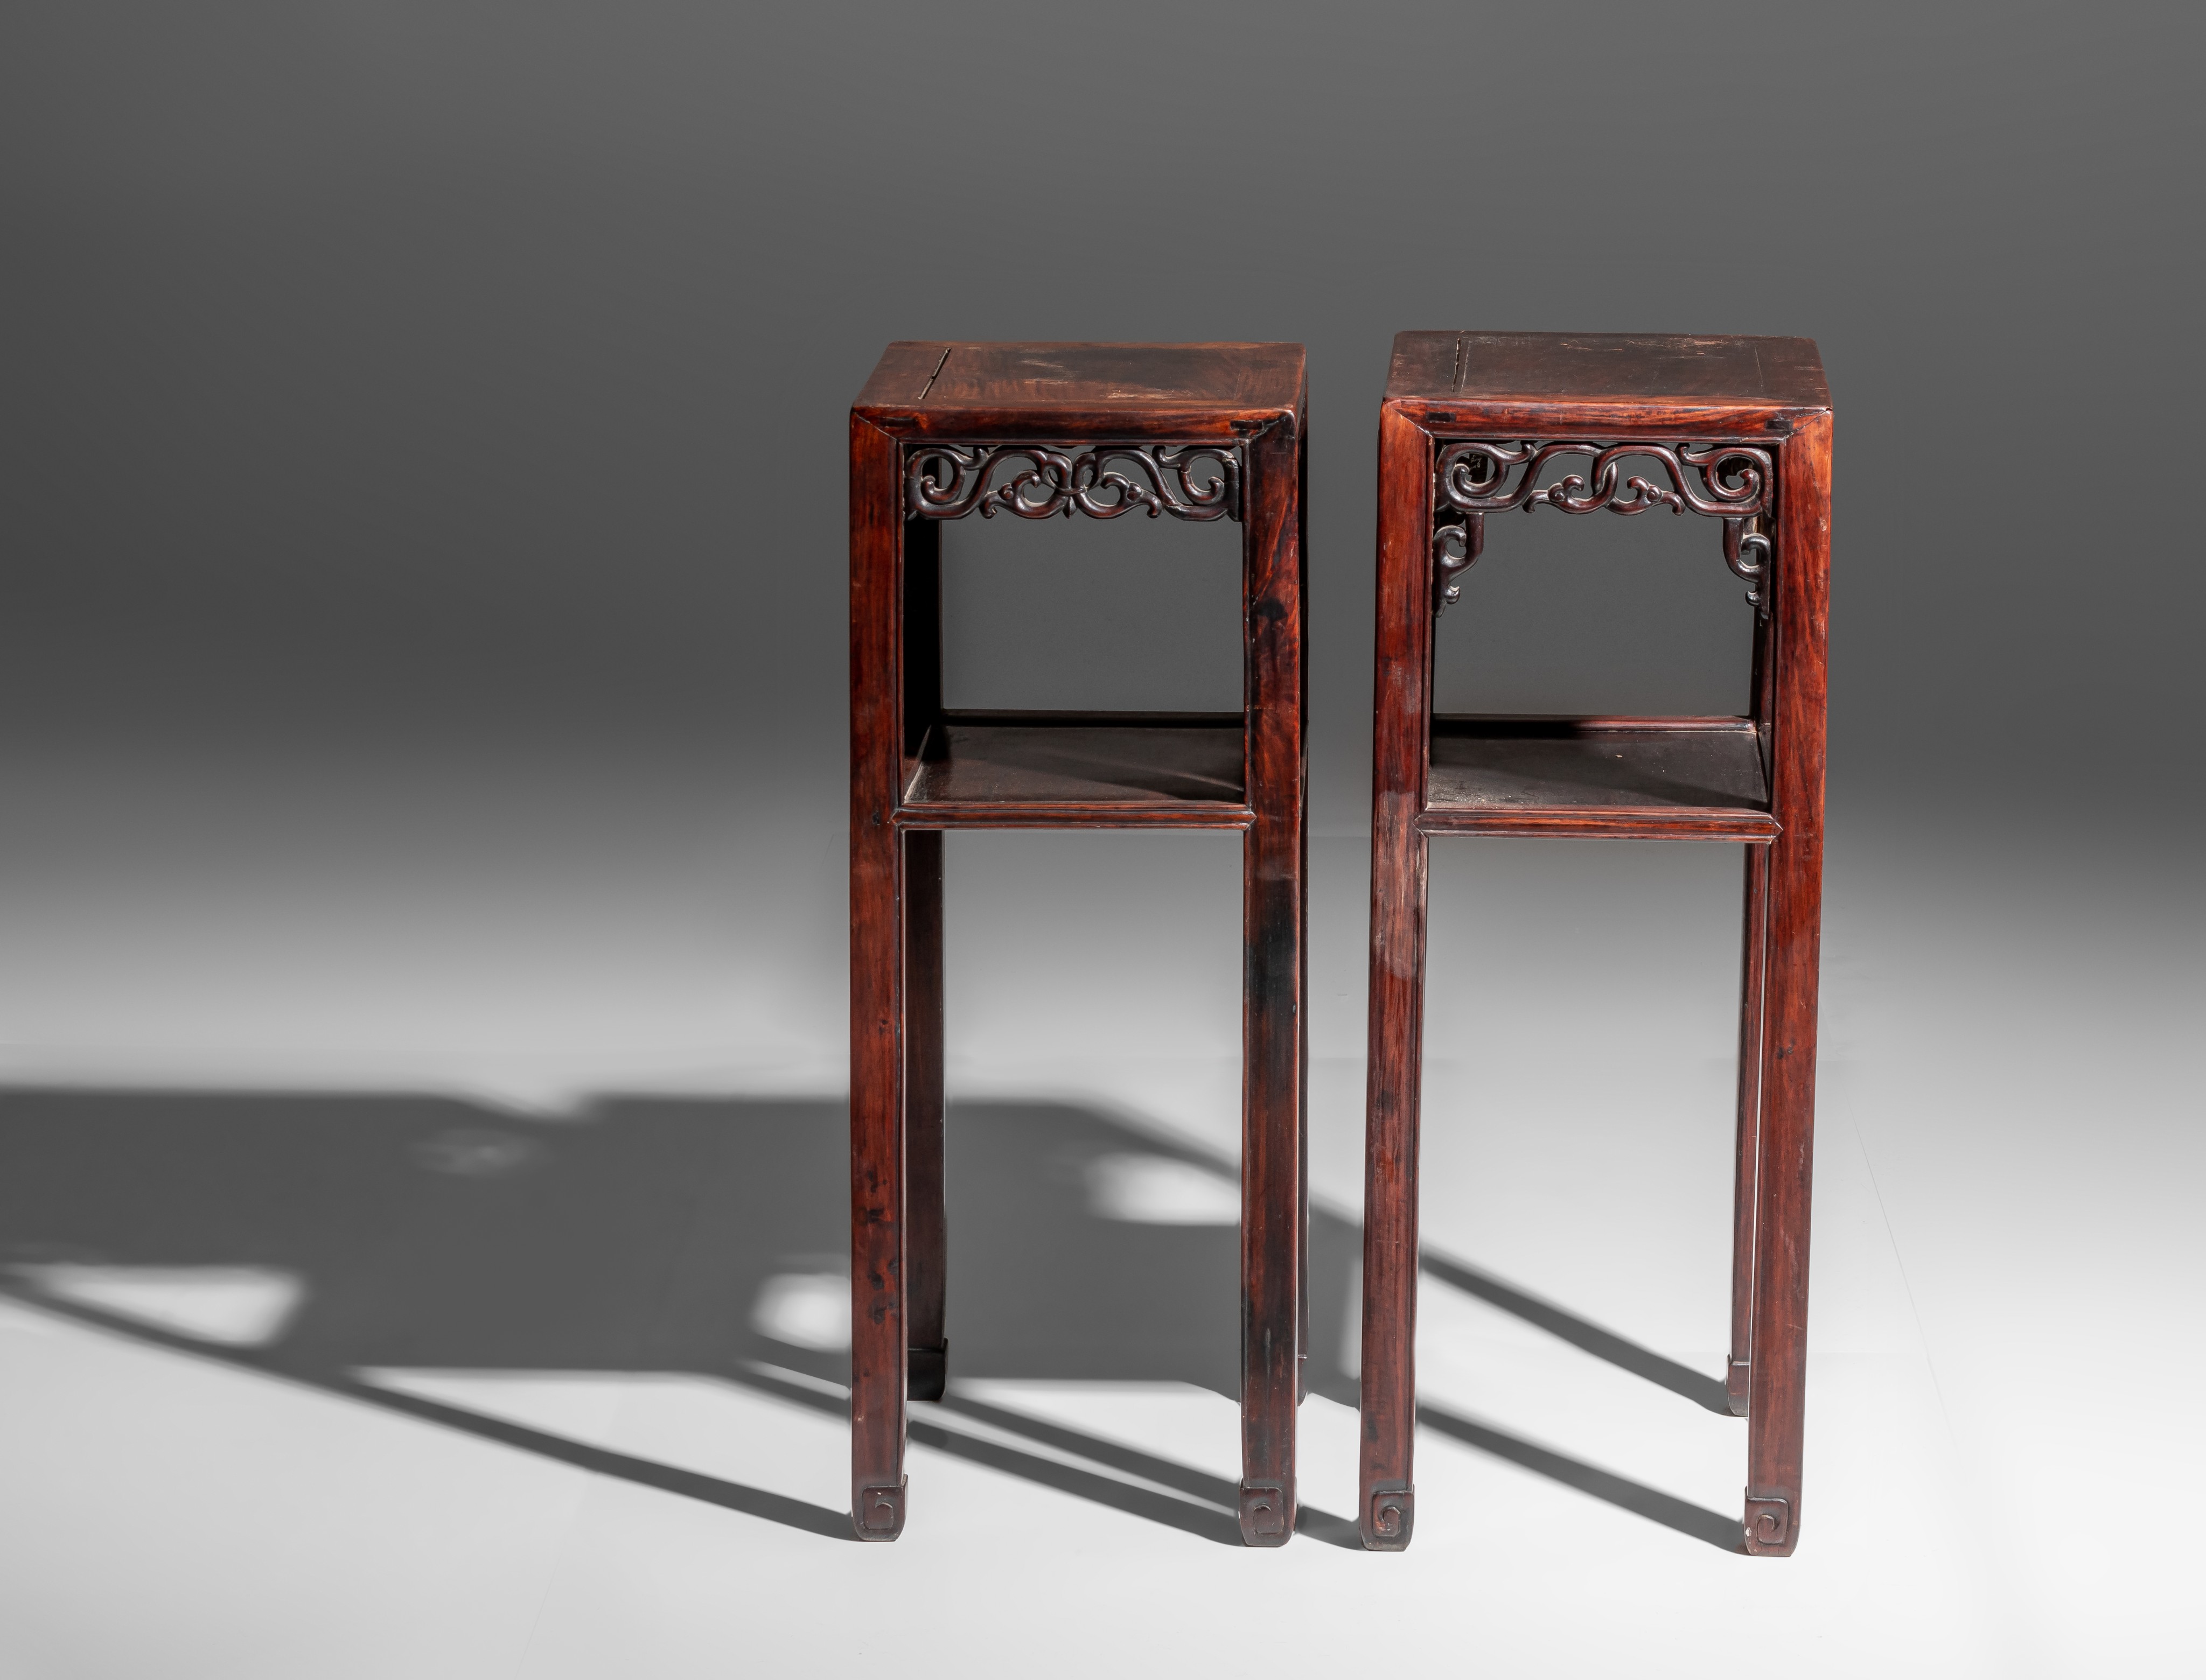 A pair of Chinese rosewood high stands, late Qing/Republic period, H 79,5 - 81 cm - Image 6 of 9